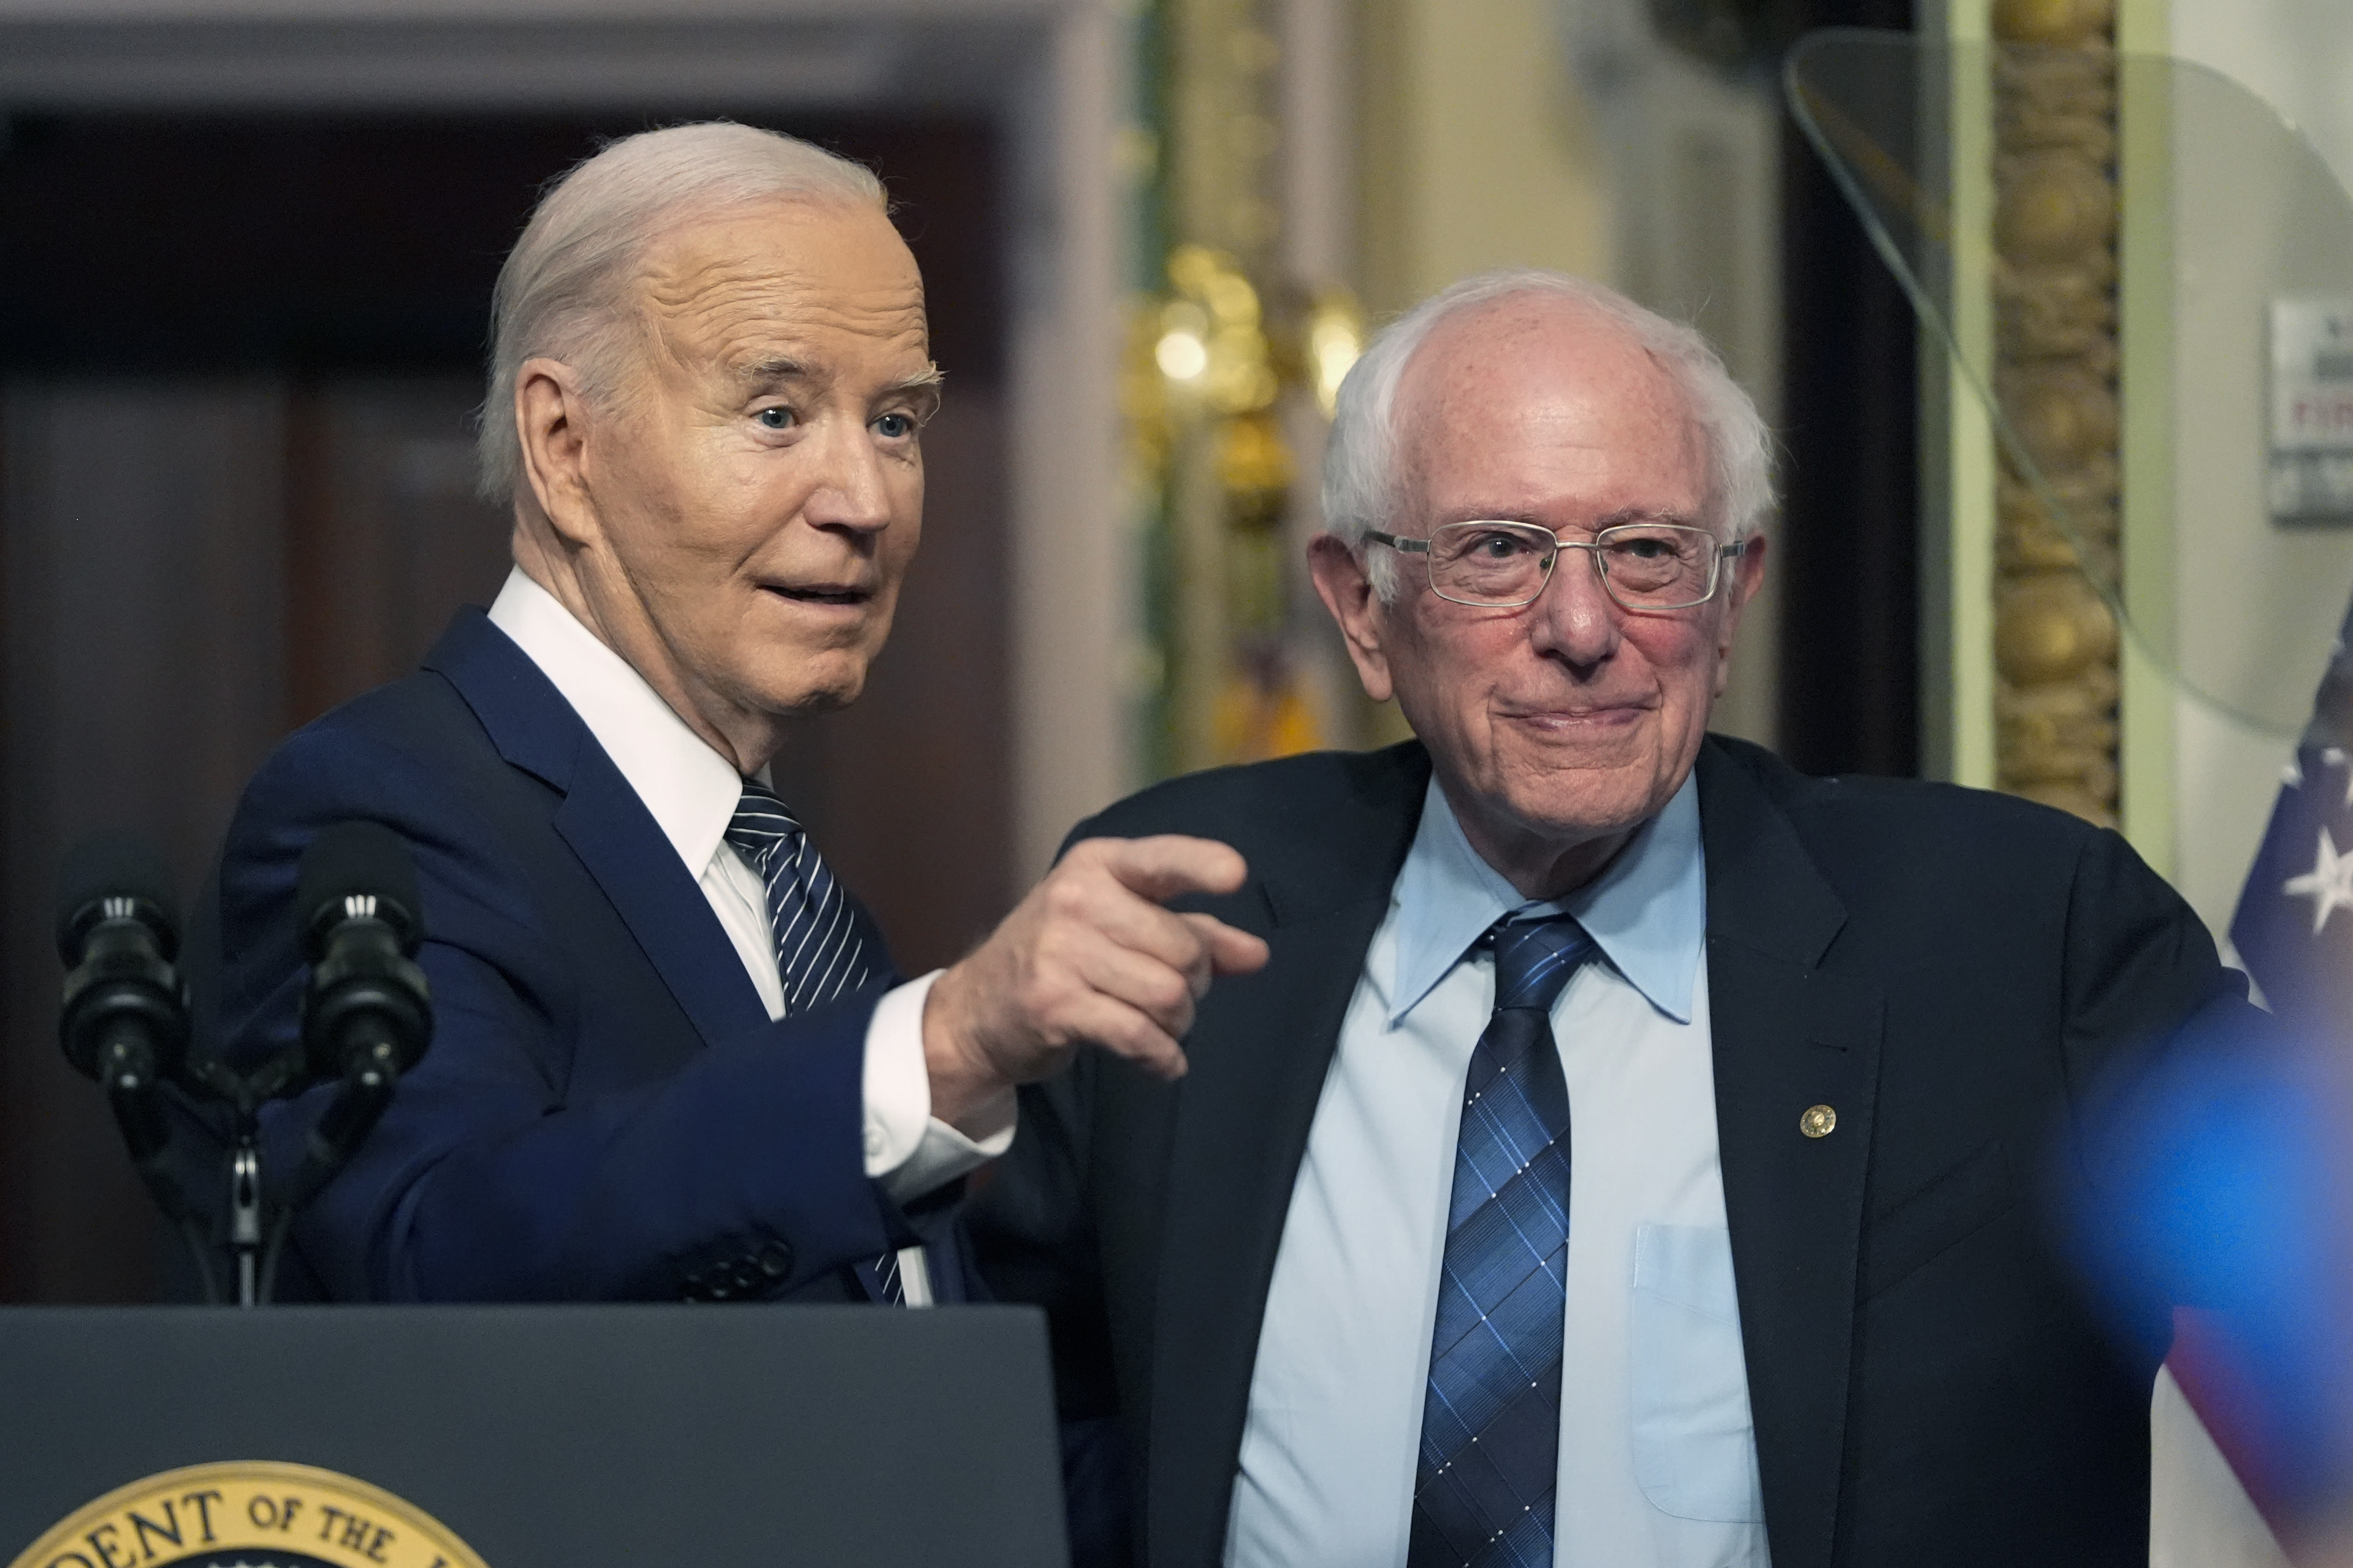 Biden isn’t the only 80-something trying to hold on to power in Washington